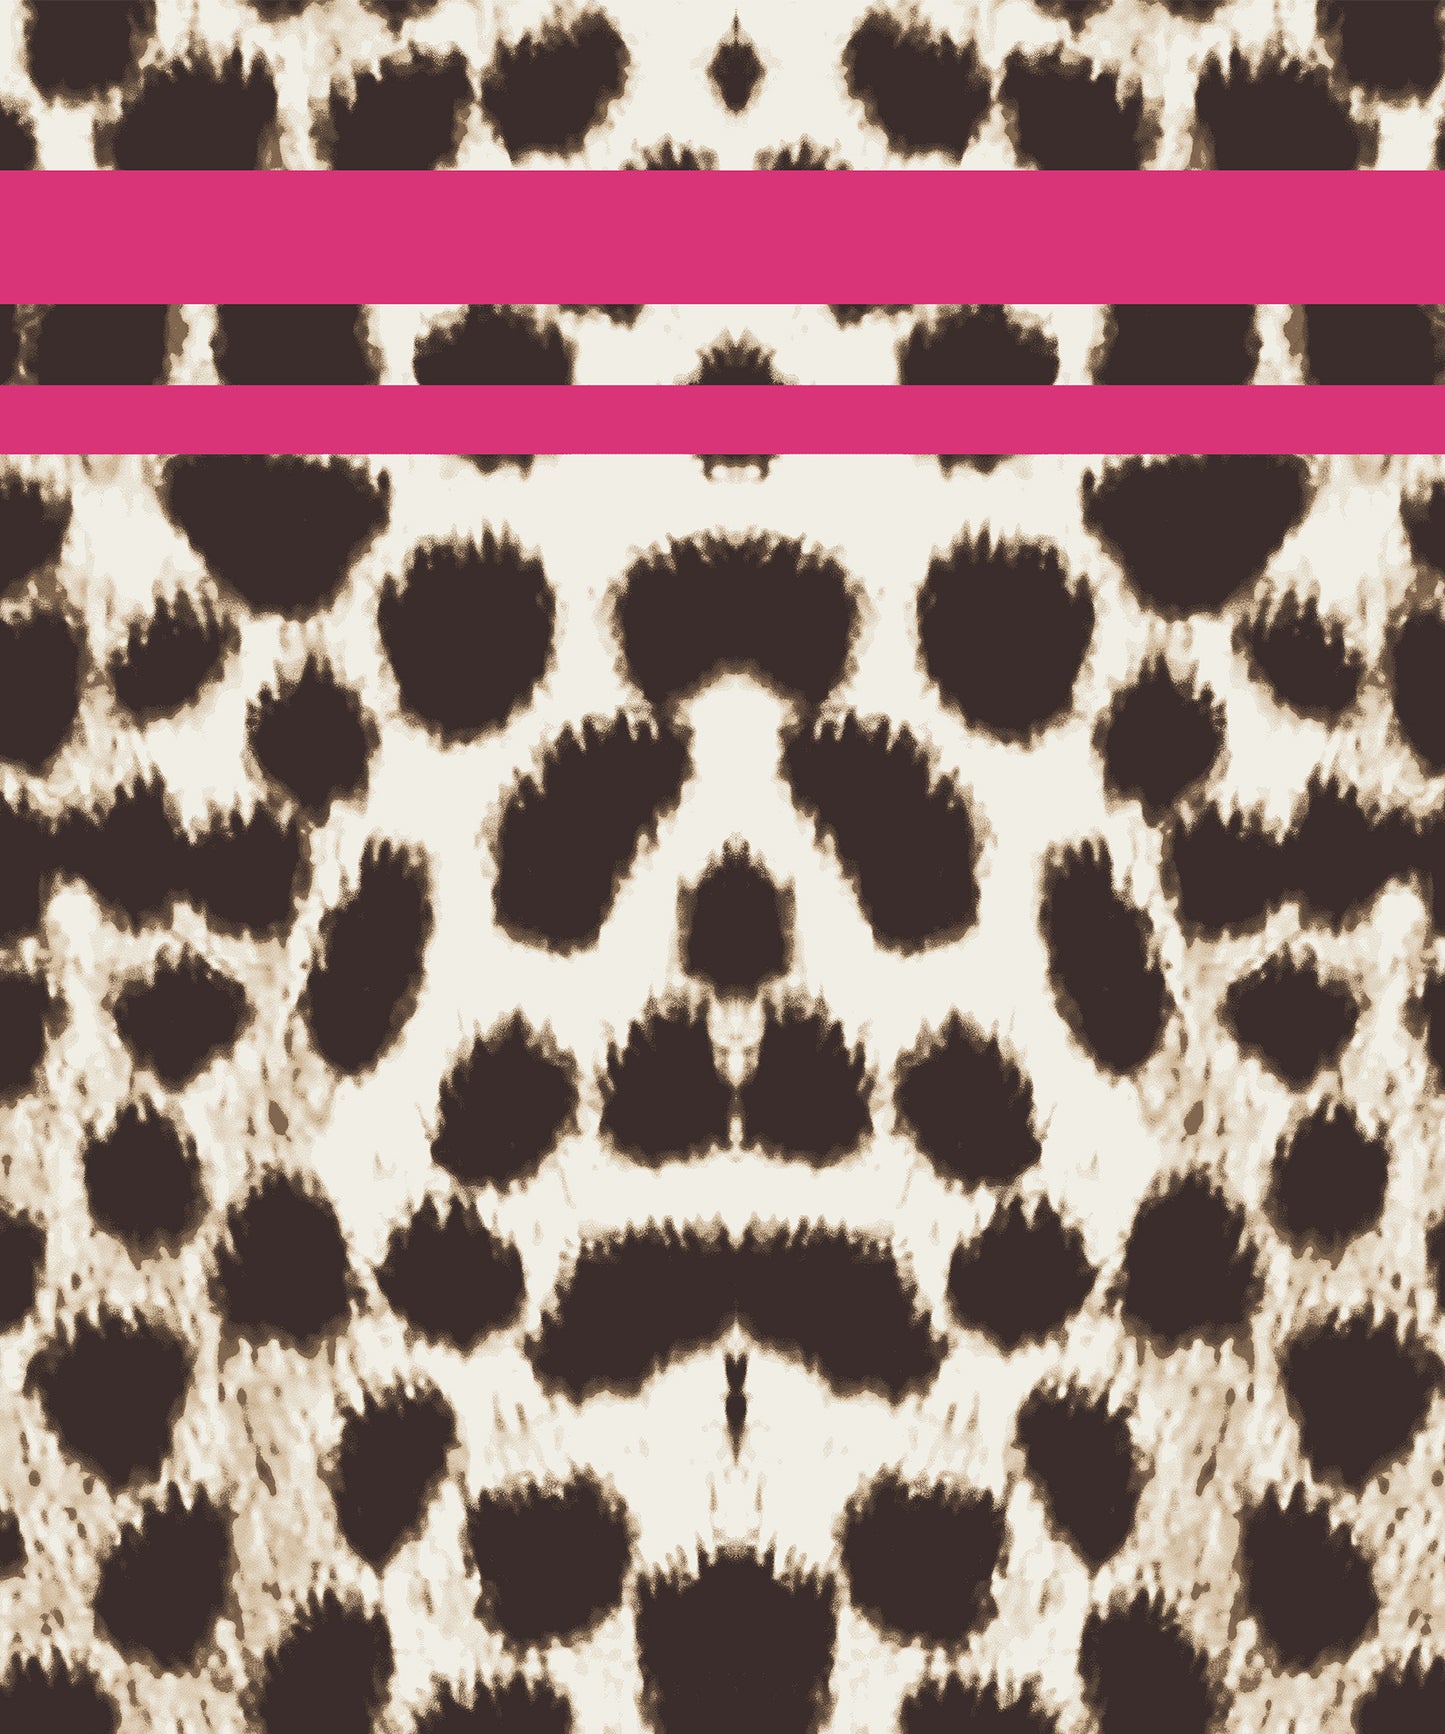 Leopard Silk Square in color Hot Pink